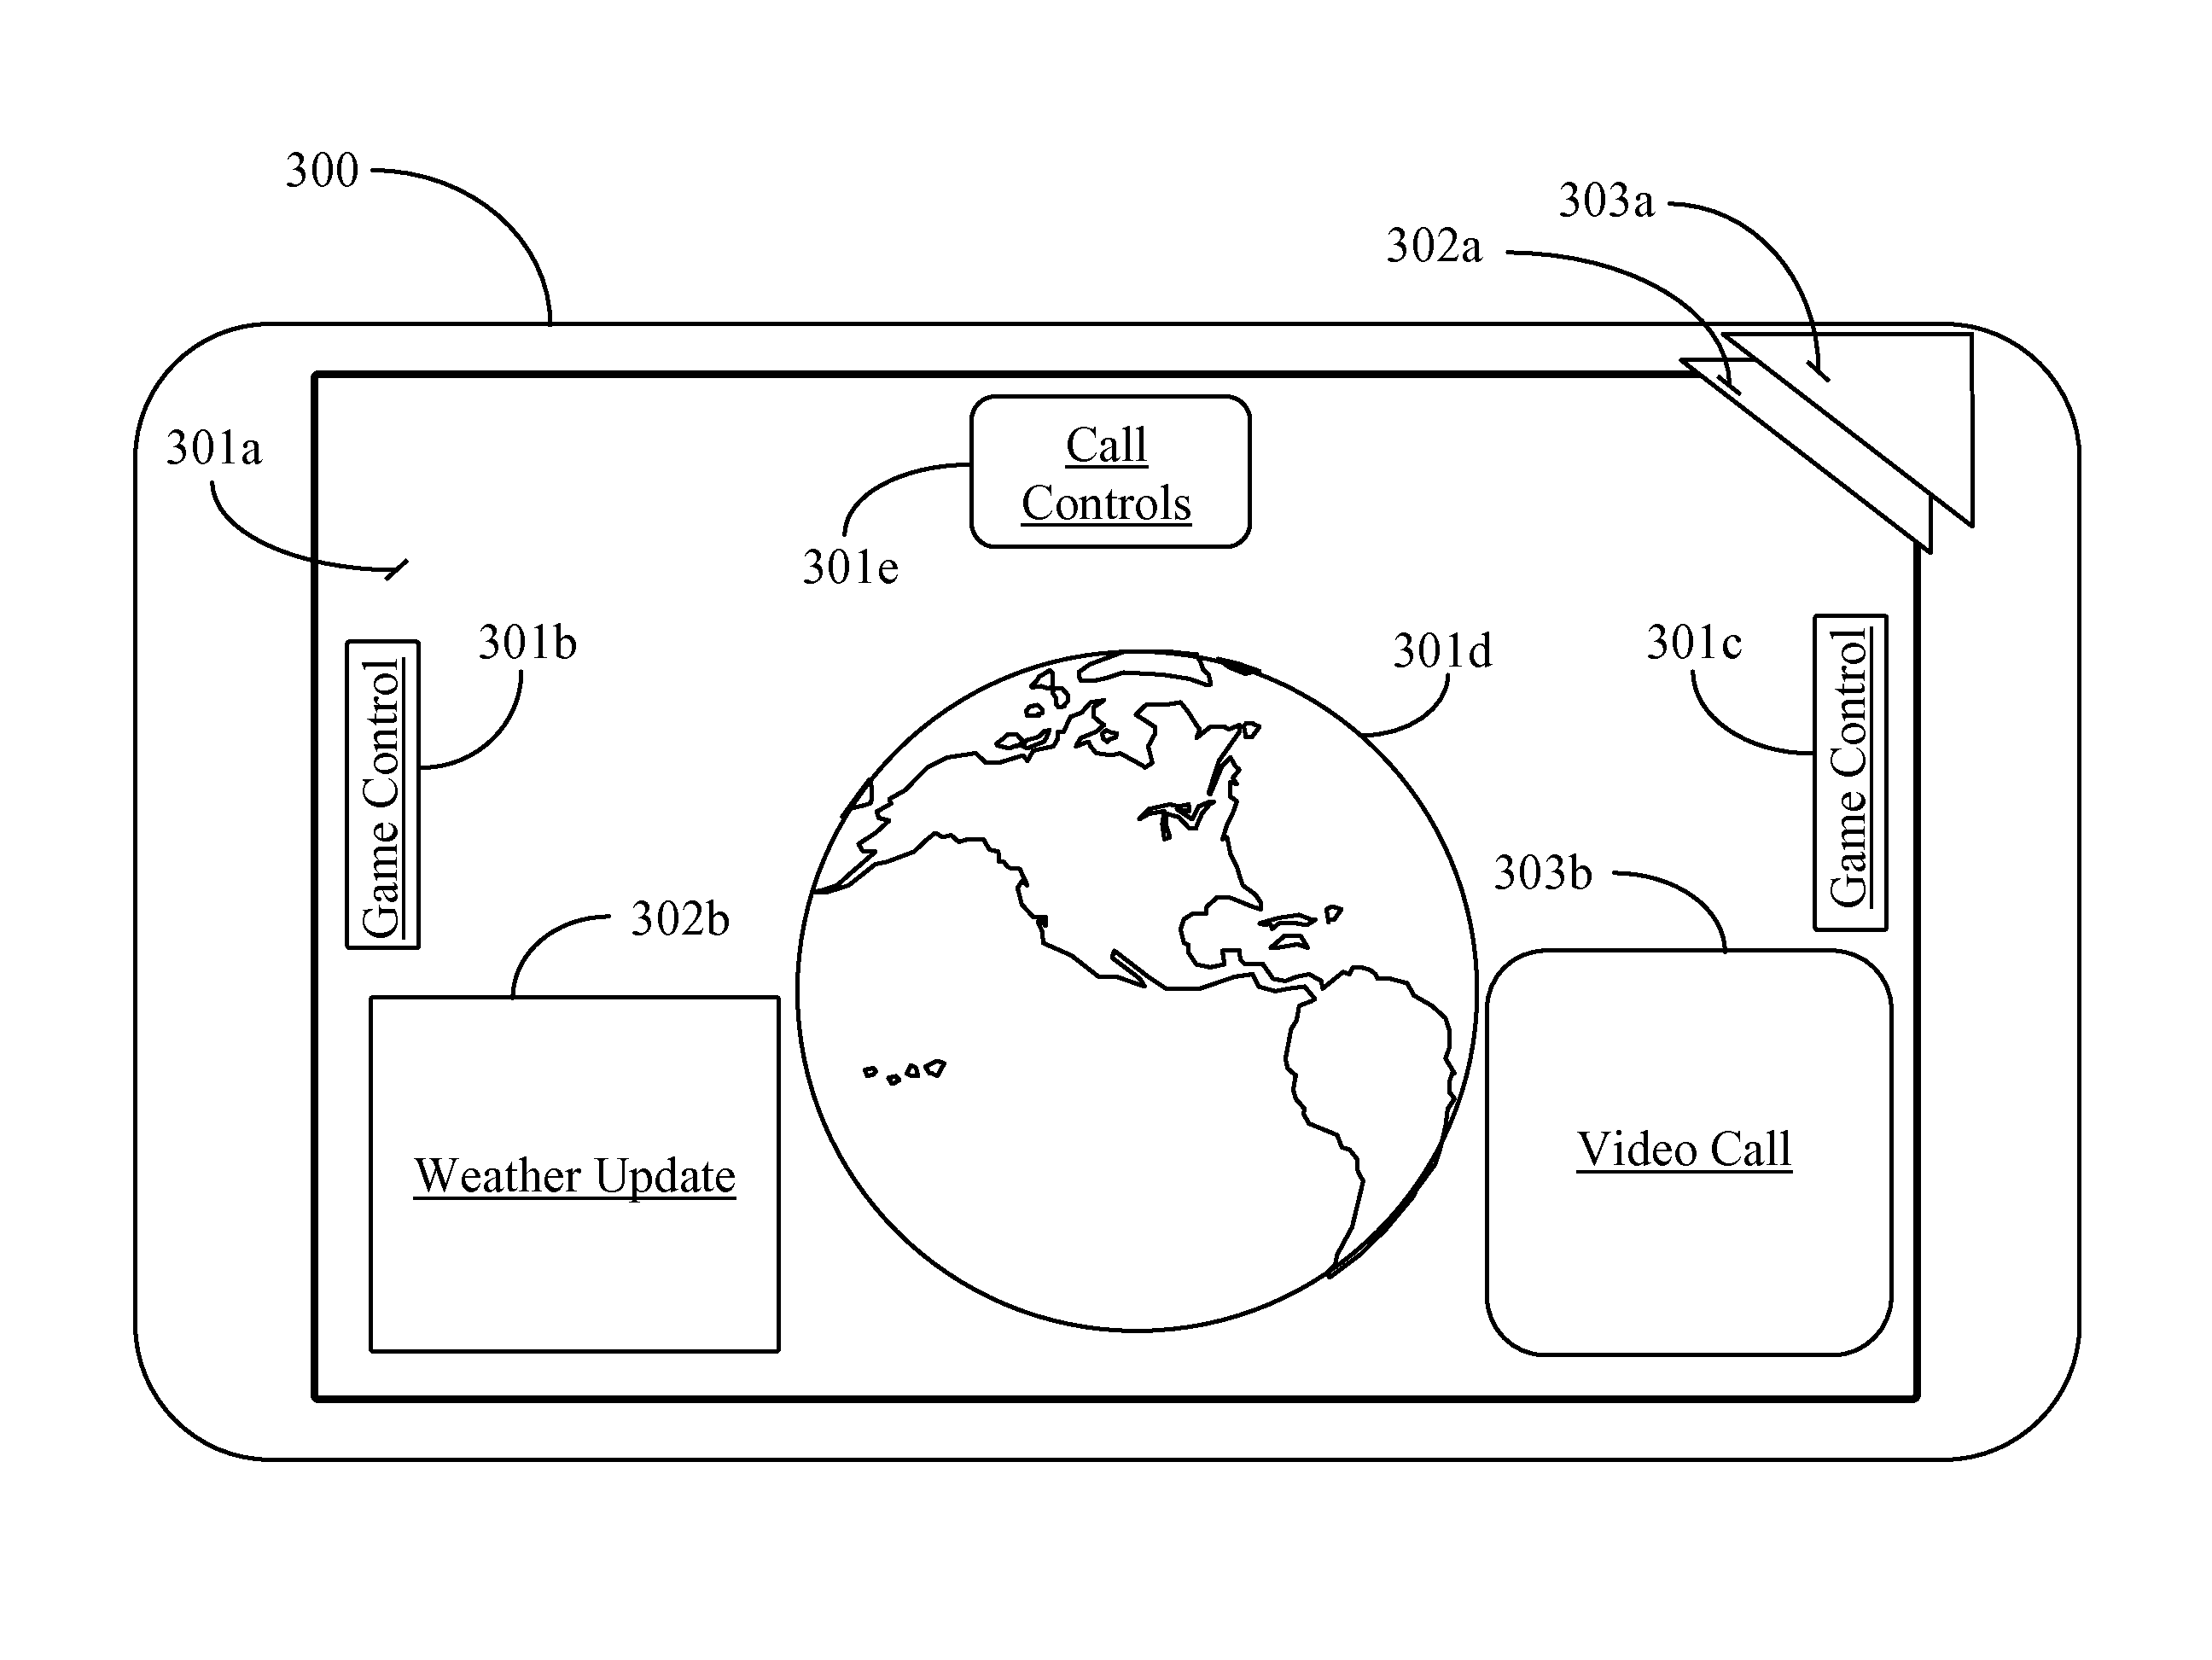 Method for simulating screen sharing for multiple applications running concurrently on a mobile platform